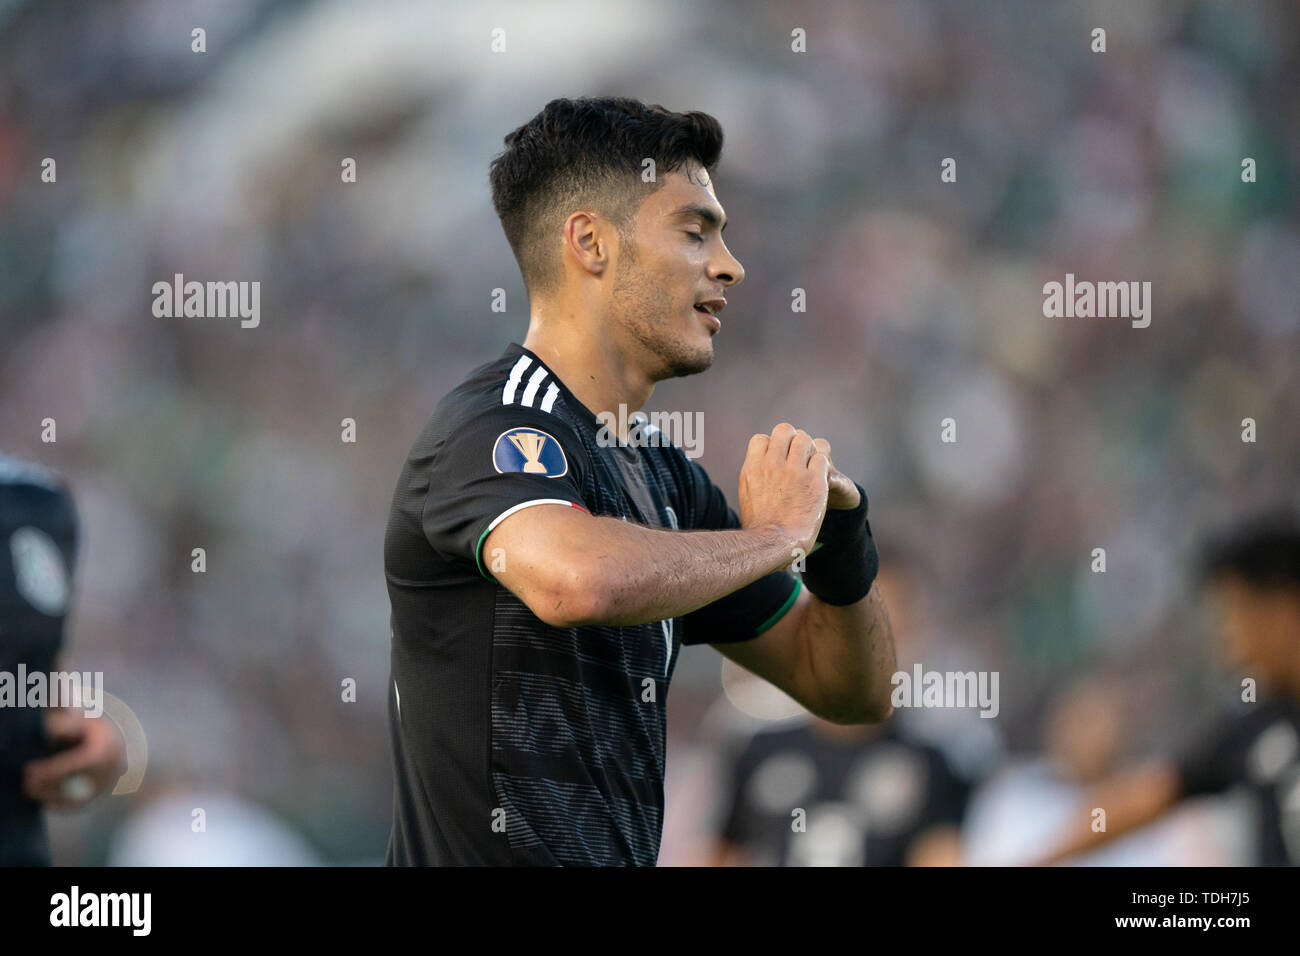 Los Angeles, USA. 15th June, 2019. Raul Jimenez of Mexico celebrates scoring during the 2019 Confederation of North, Central American and Caribbean Association Football (CONCACAF) Gold Cup between Mexico and Cuba in Pasadena, Los Angeles, the United States, June 15, 2019. Credit: Qian Weizhong/Xinhua/Alamy Live News Stock Photo